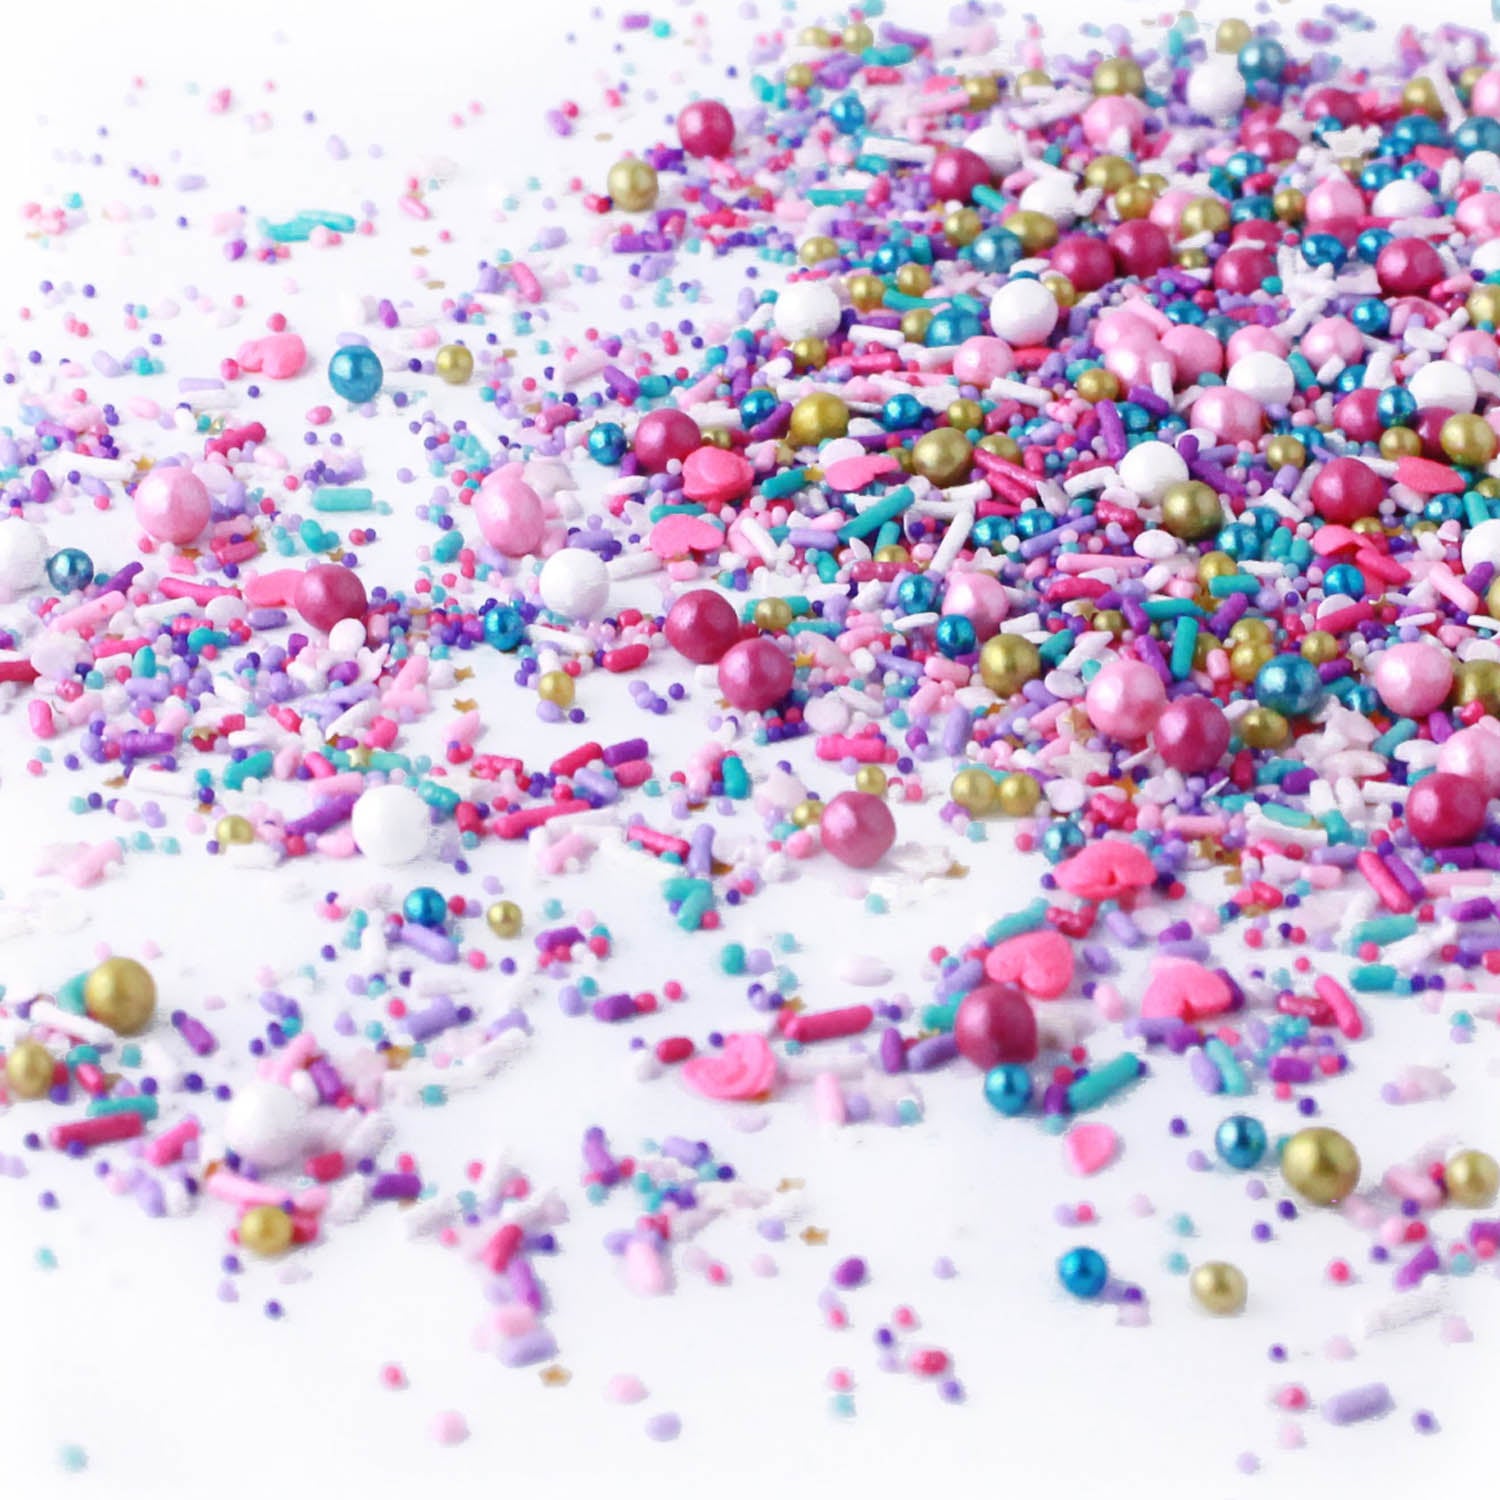 Sprinkle mix with light and dark pink, gold, blue, and white spheres and rods. Same colors as smaller sprinkle pieces.